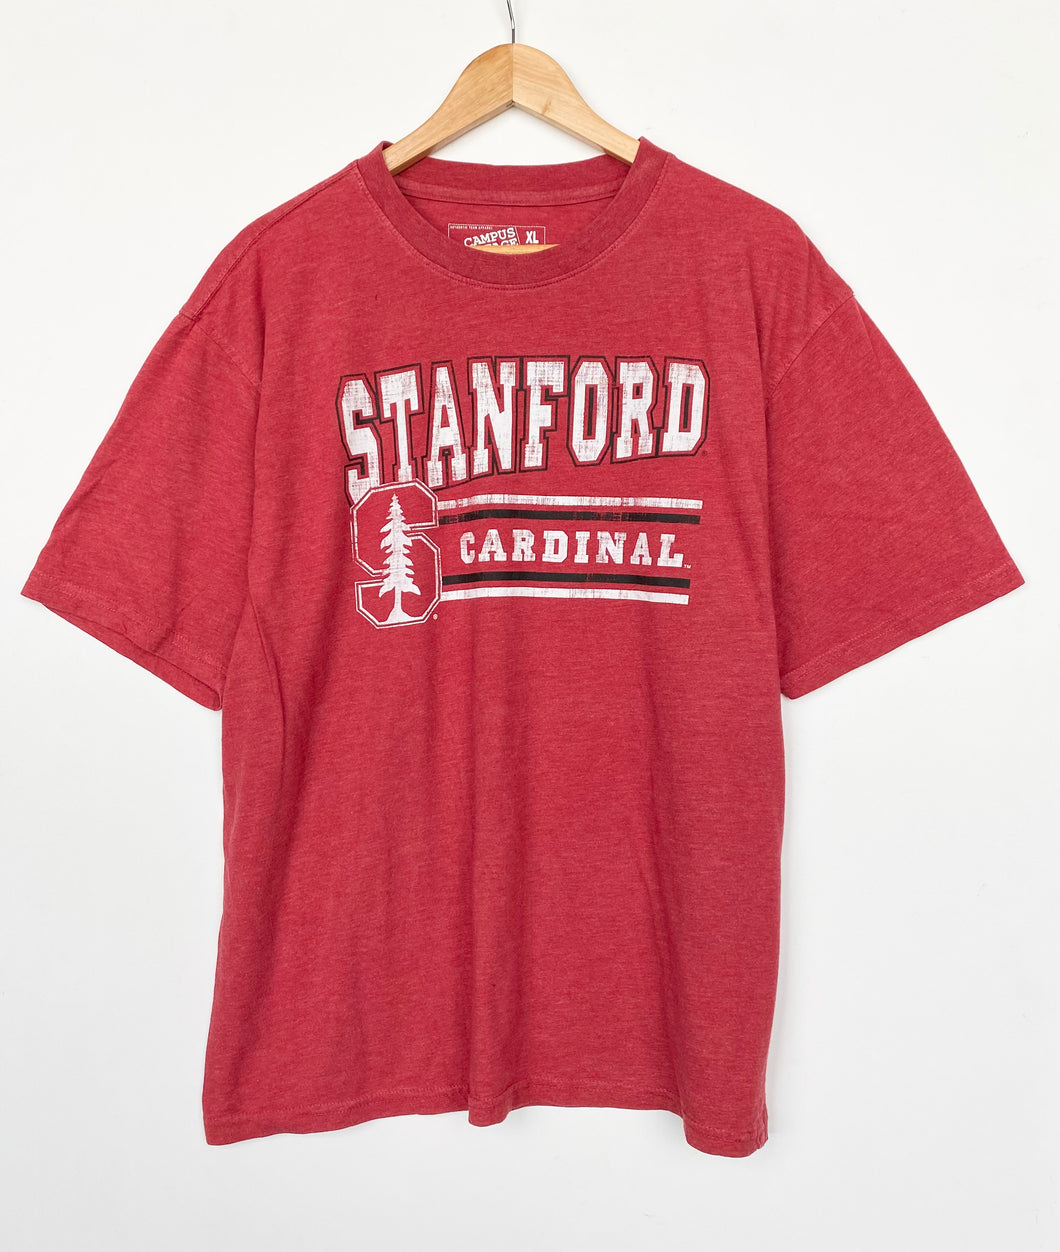 Stanford American College t-shirt (XL)